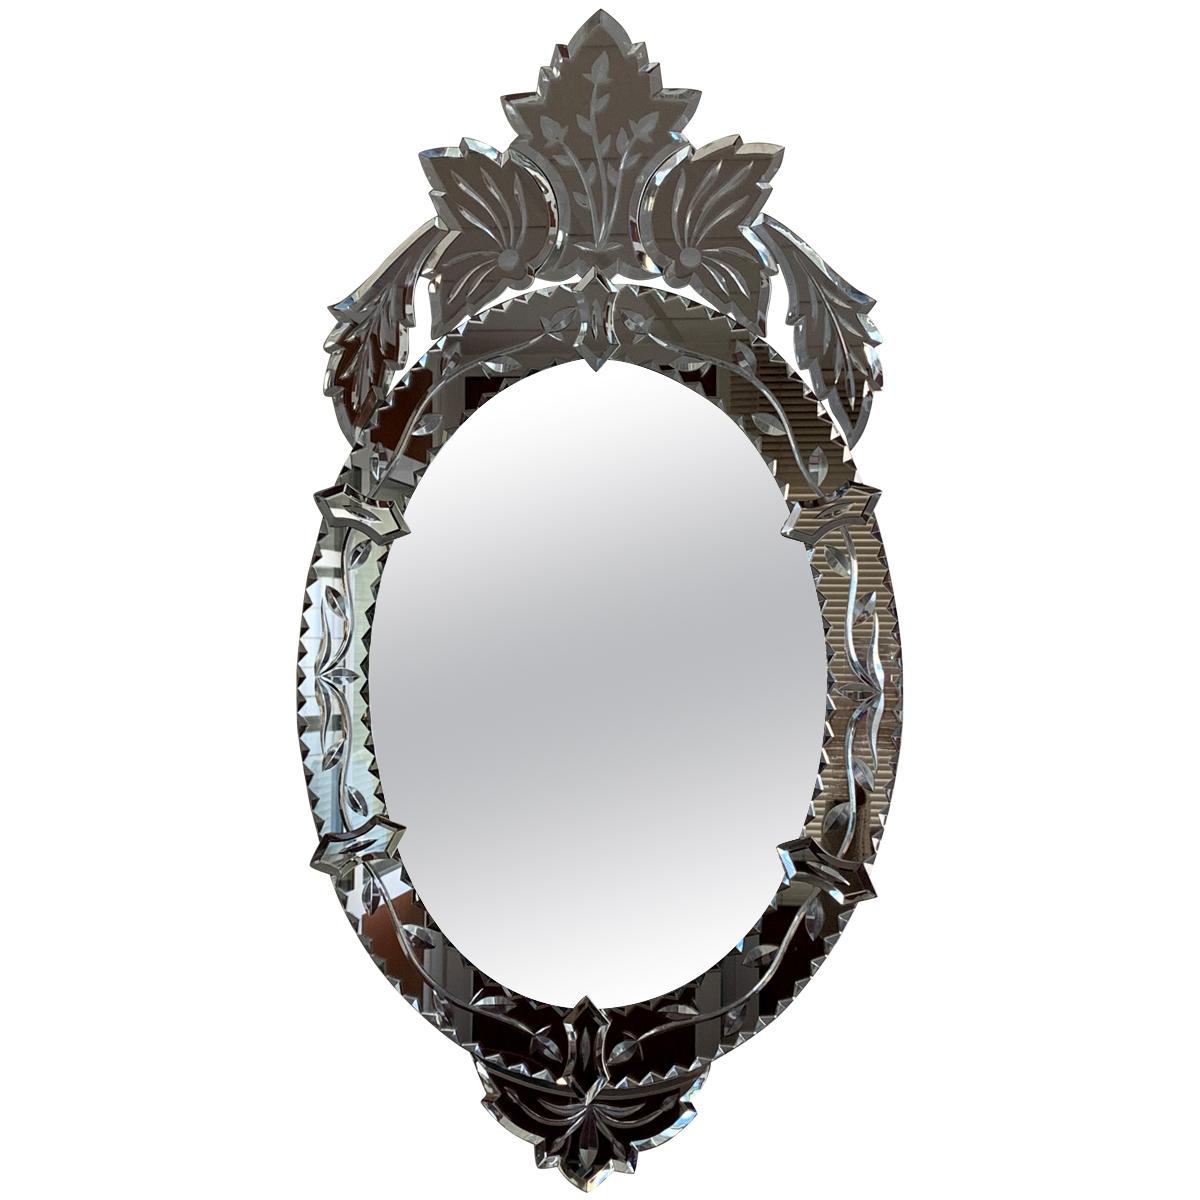 New Oval Venetian Mirror with Crest